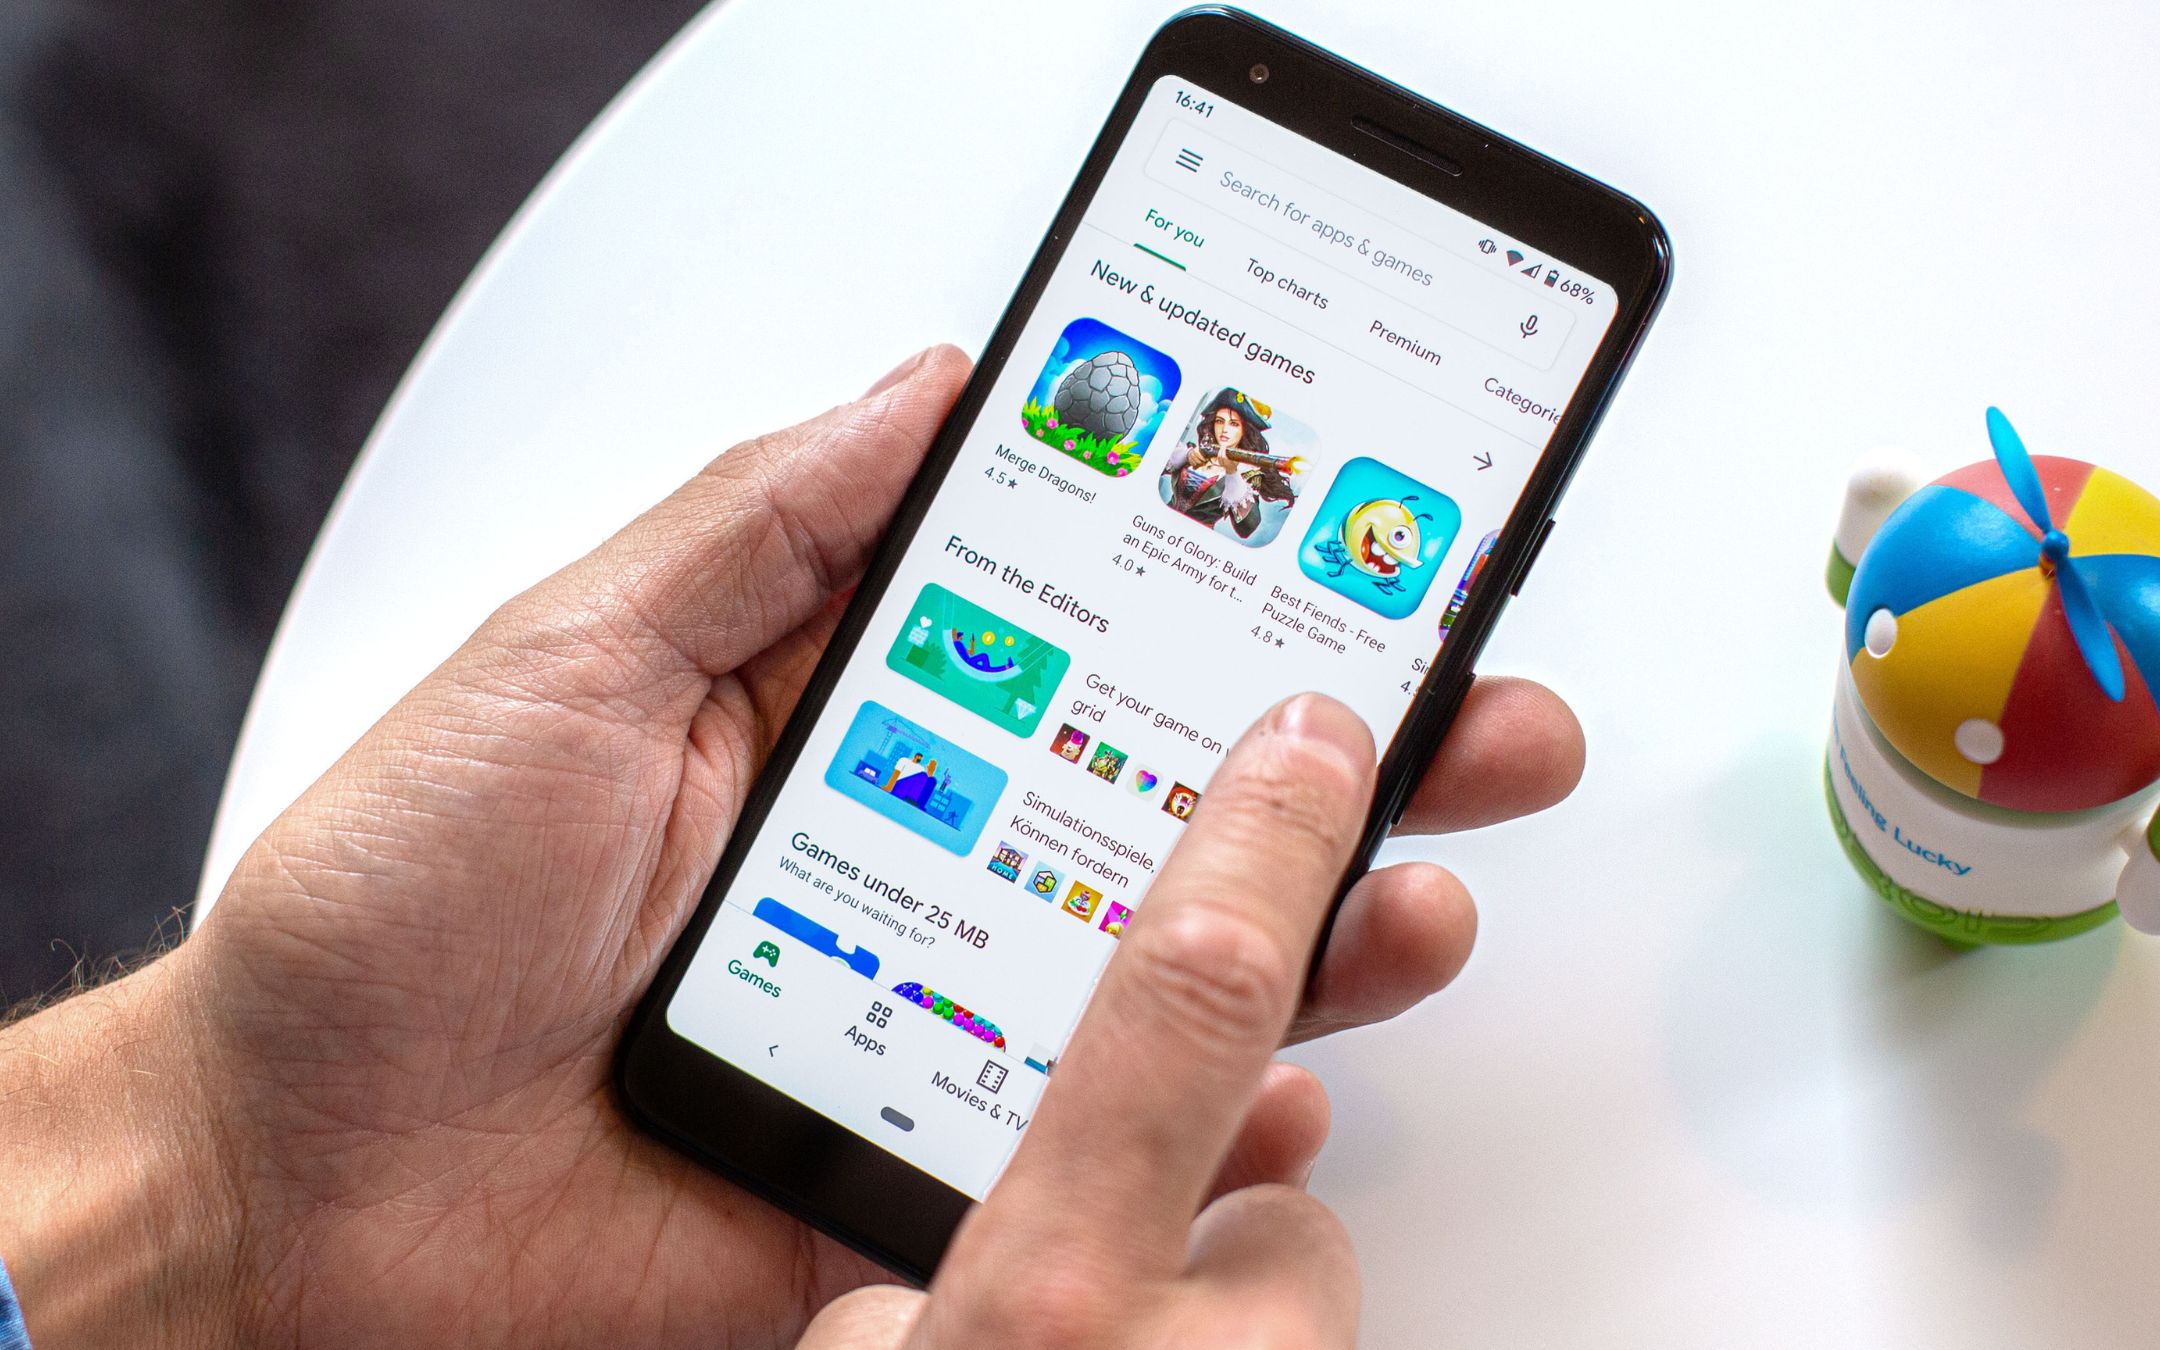 Play Store, Google improves content search